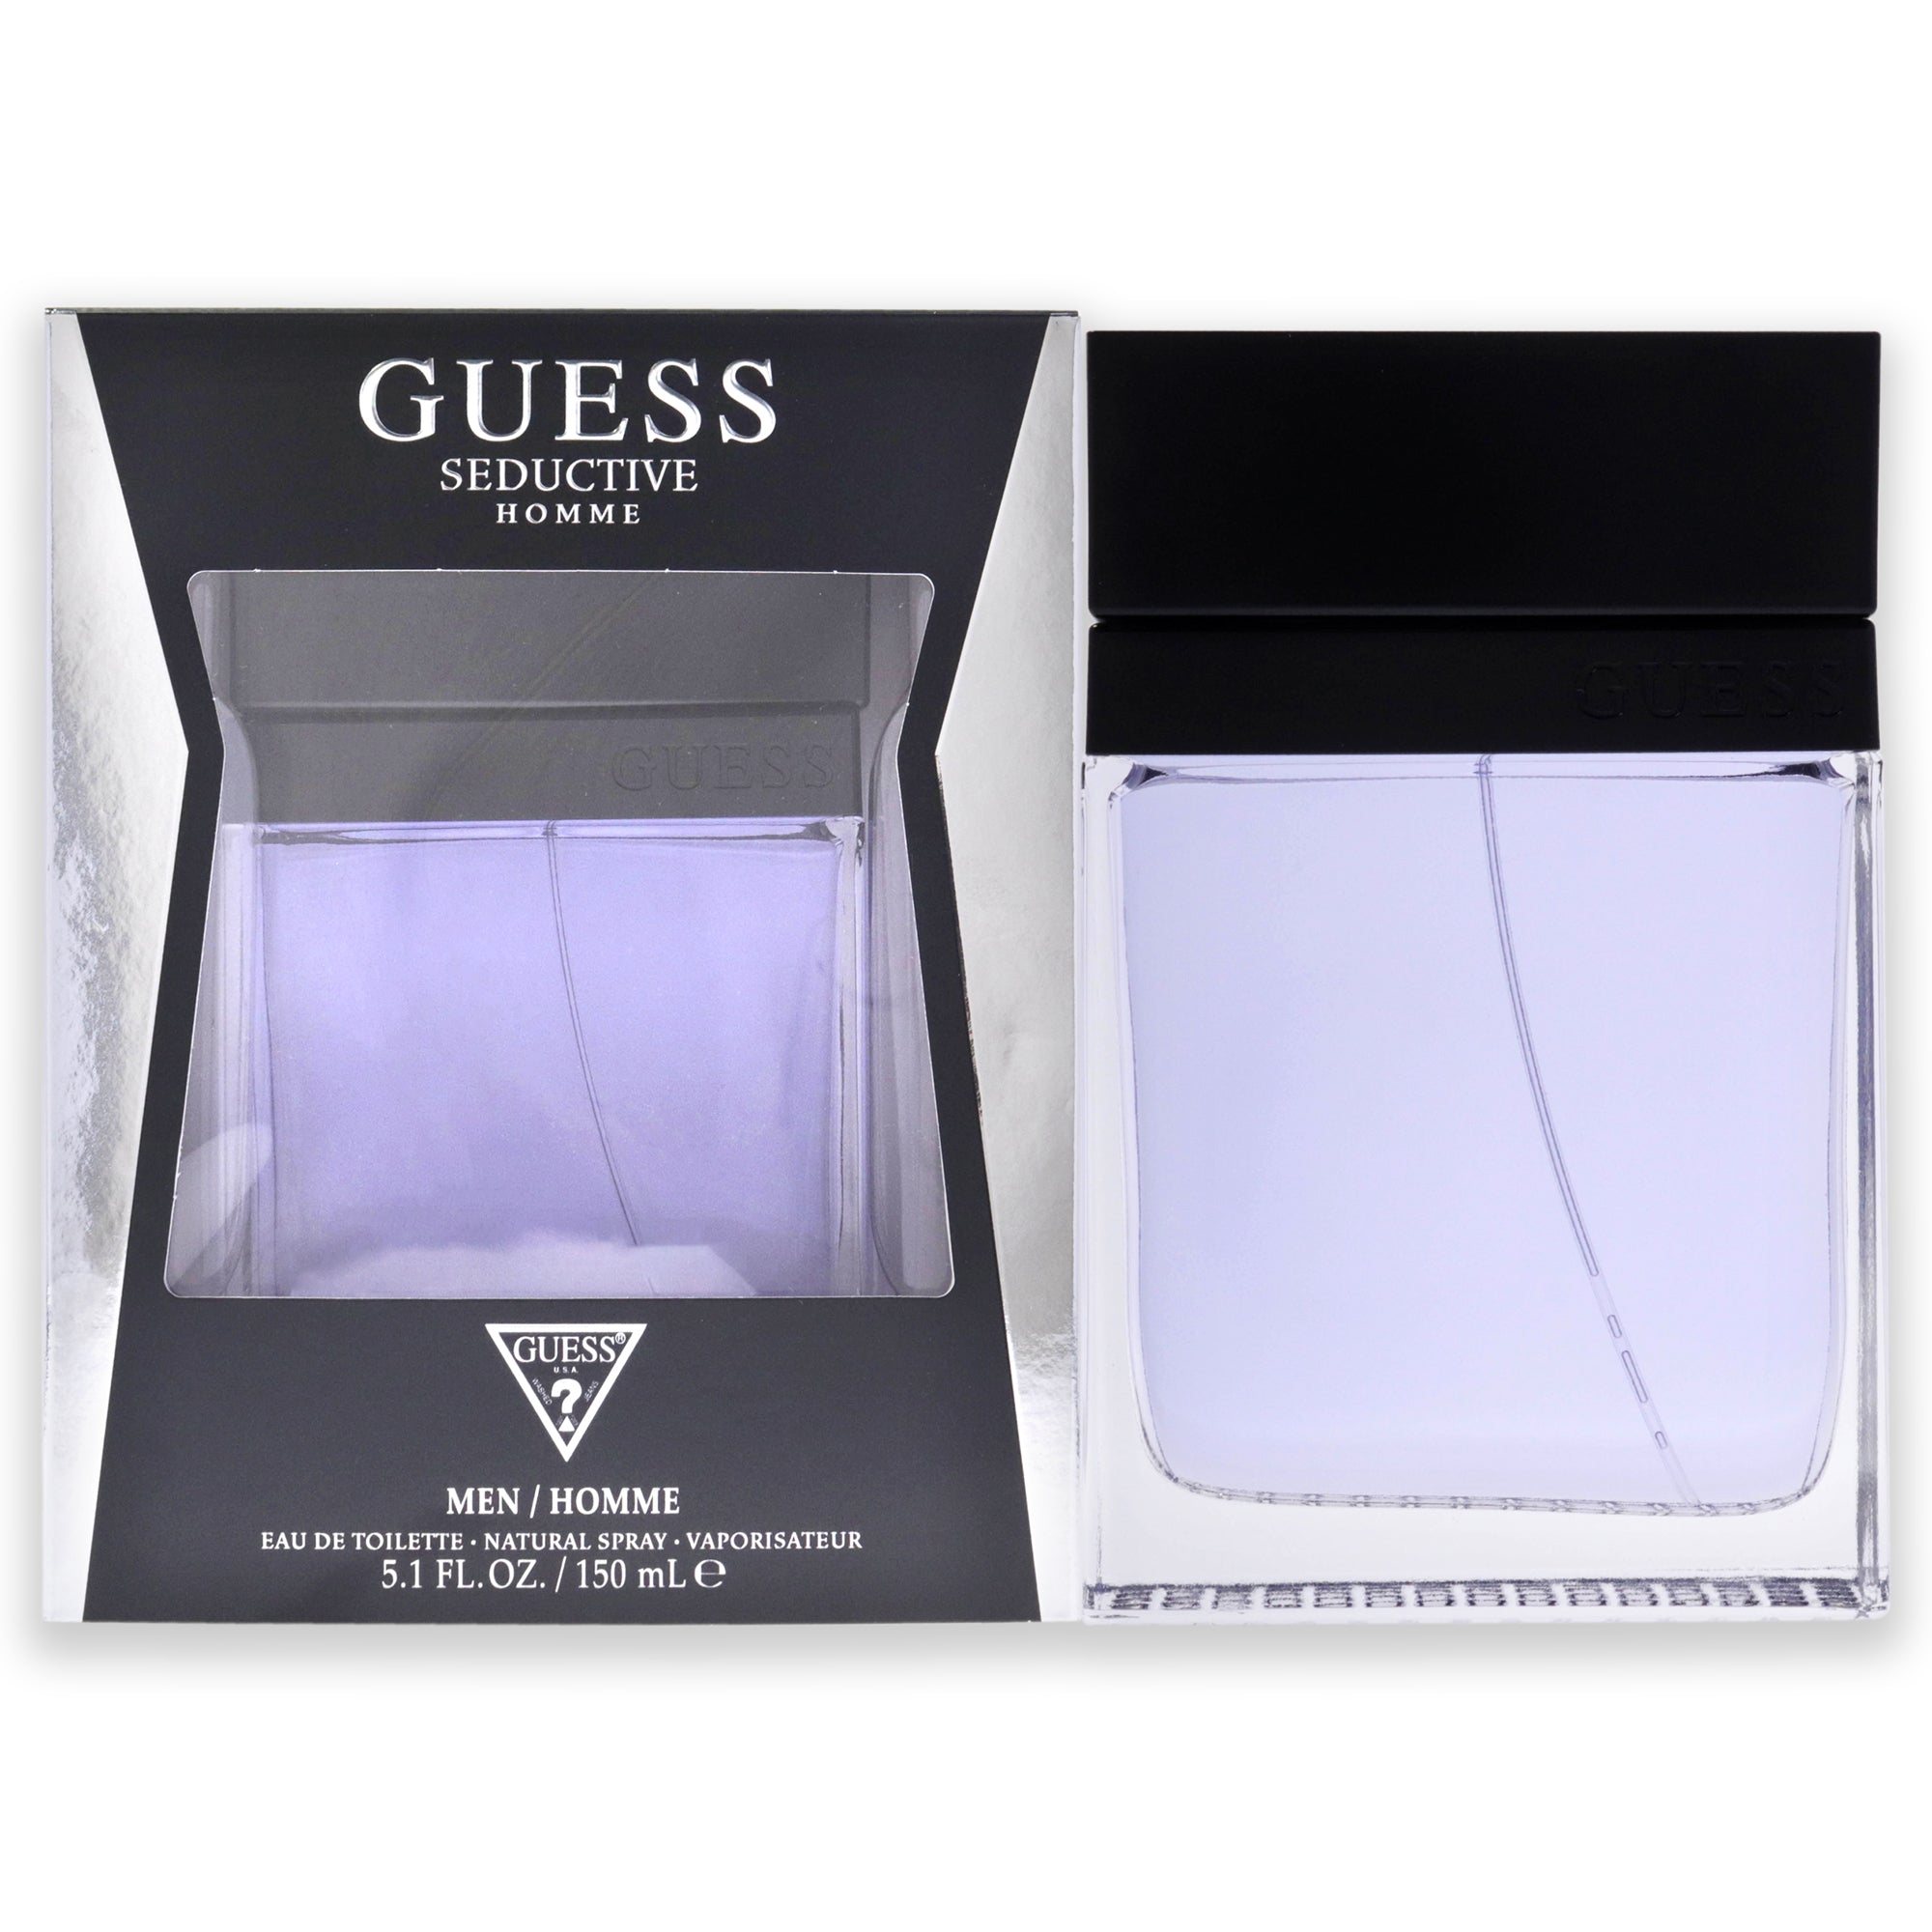 Guess Seductive by Guess for Men 5.1 oz EDT Spray